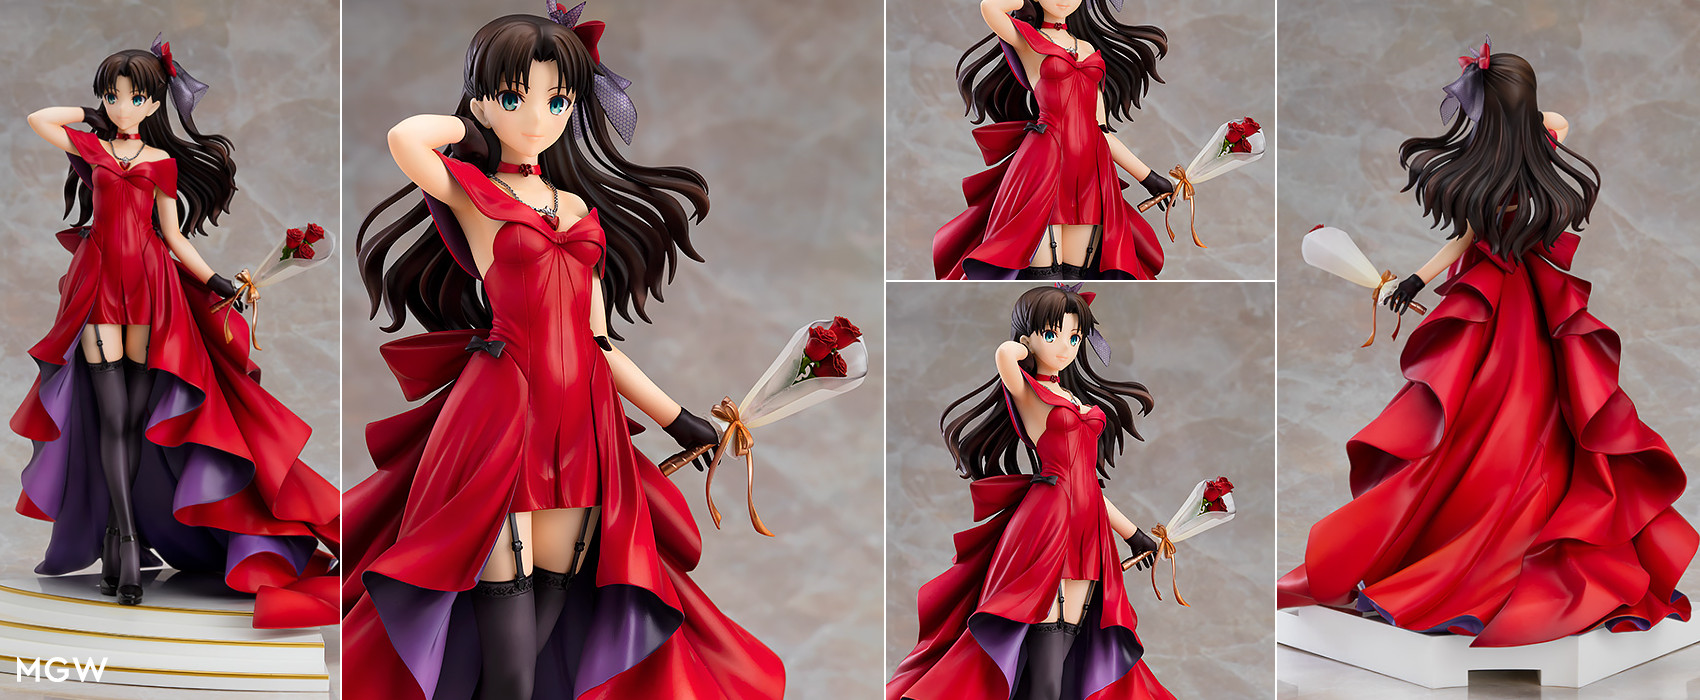 Rin Tohsaka ~15th Celebration Dress Ver.~ by Good Smile Company from Fate/stay night MGW Header